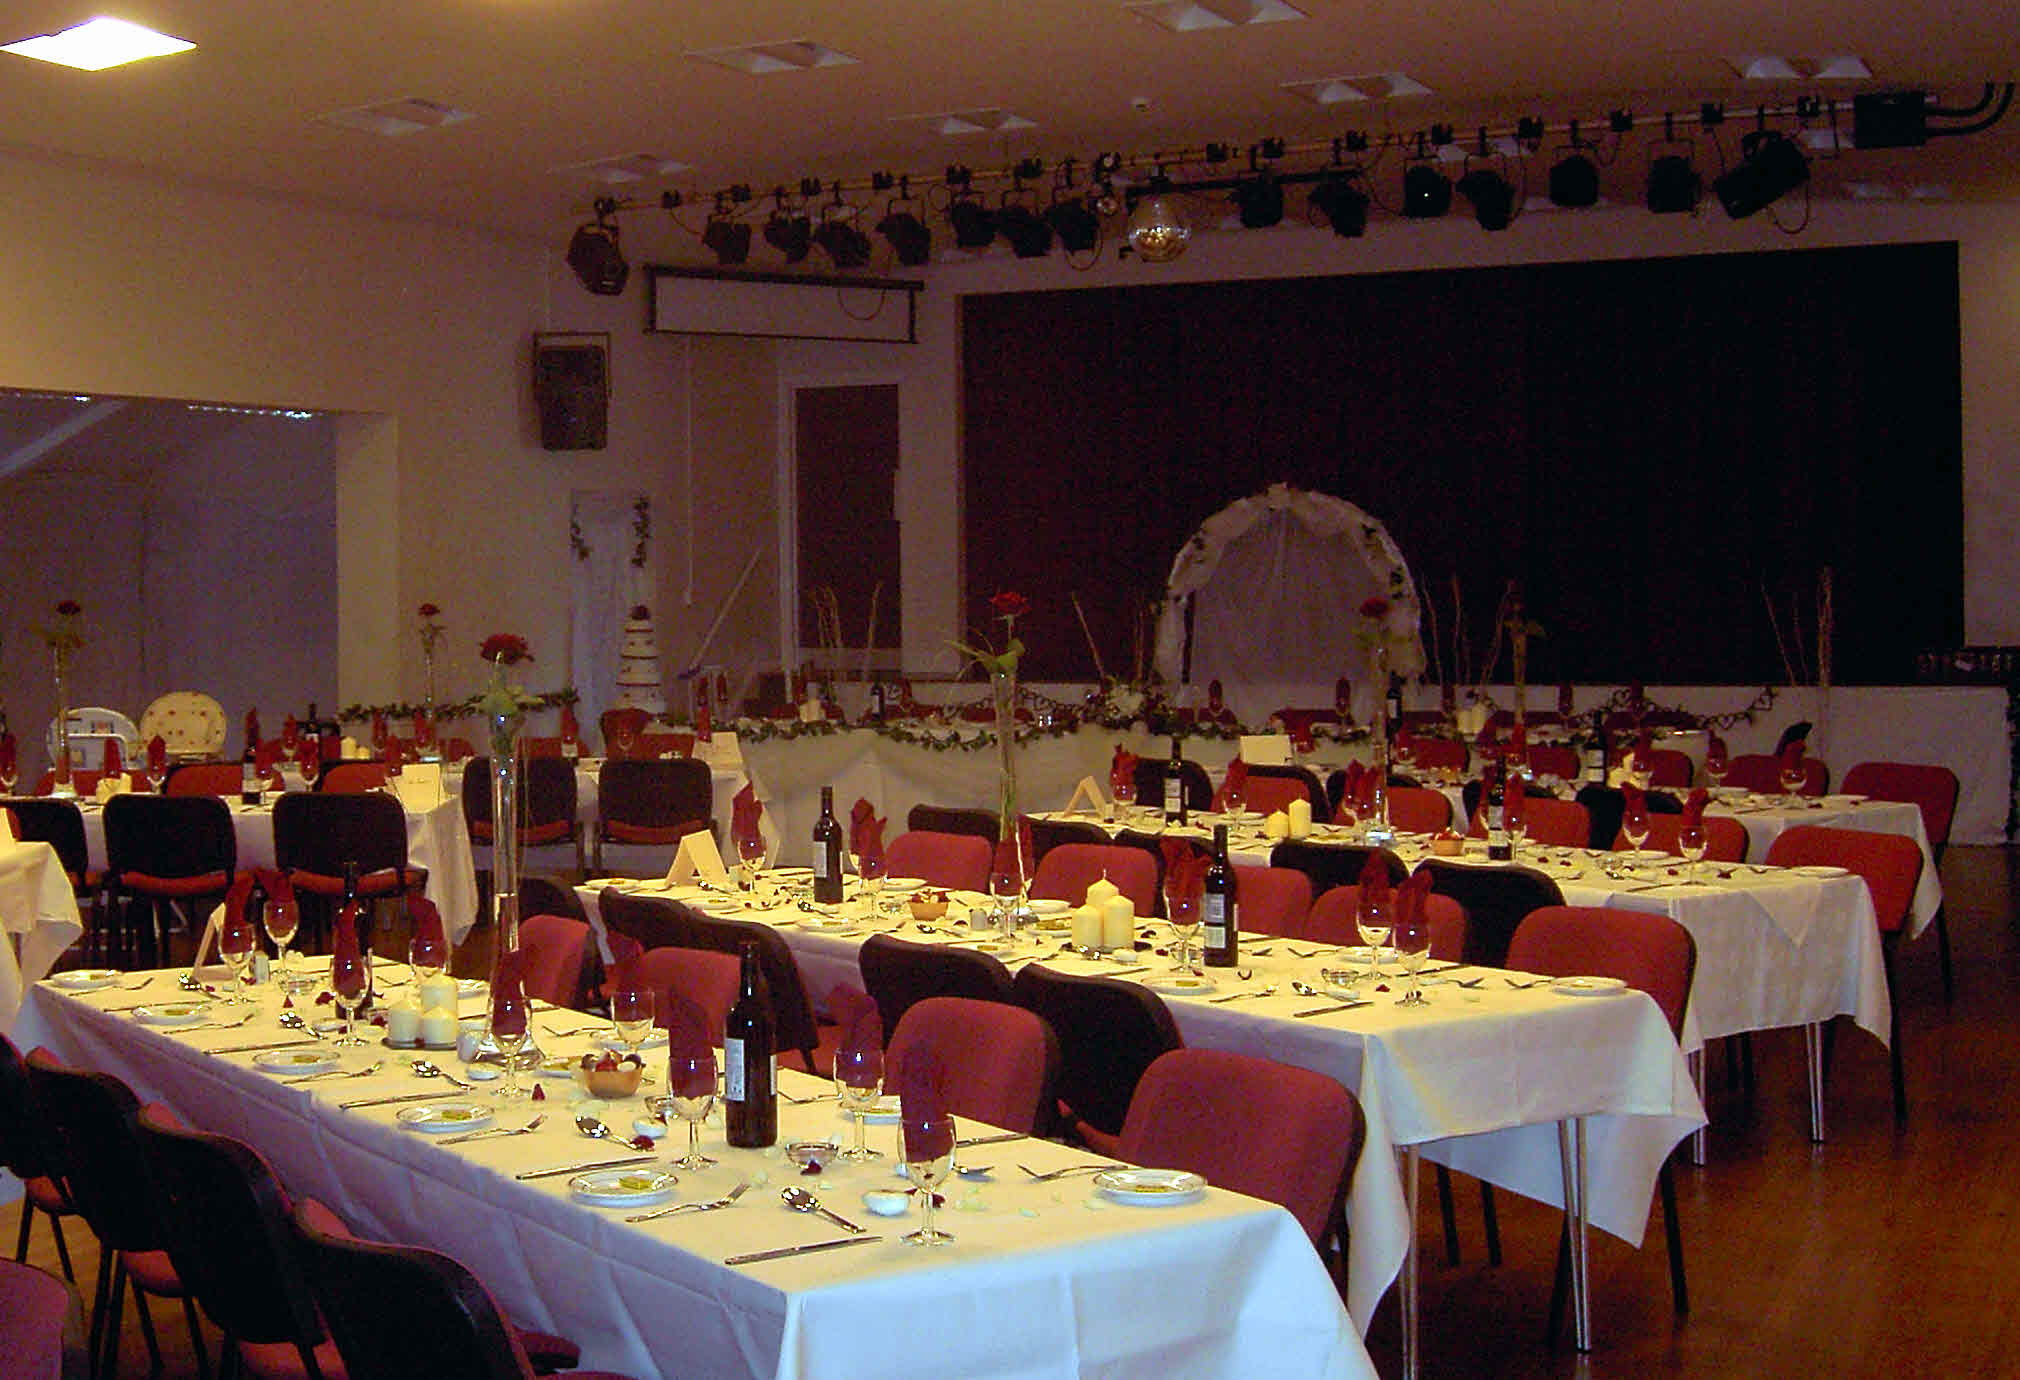 Main Hall set up for a Wedding Party